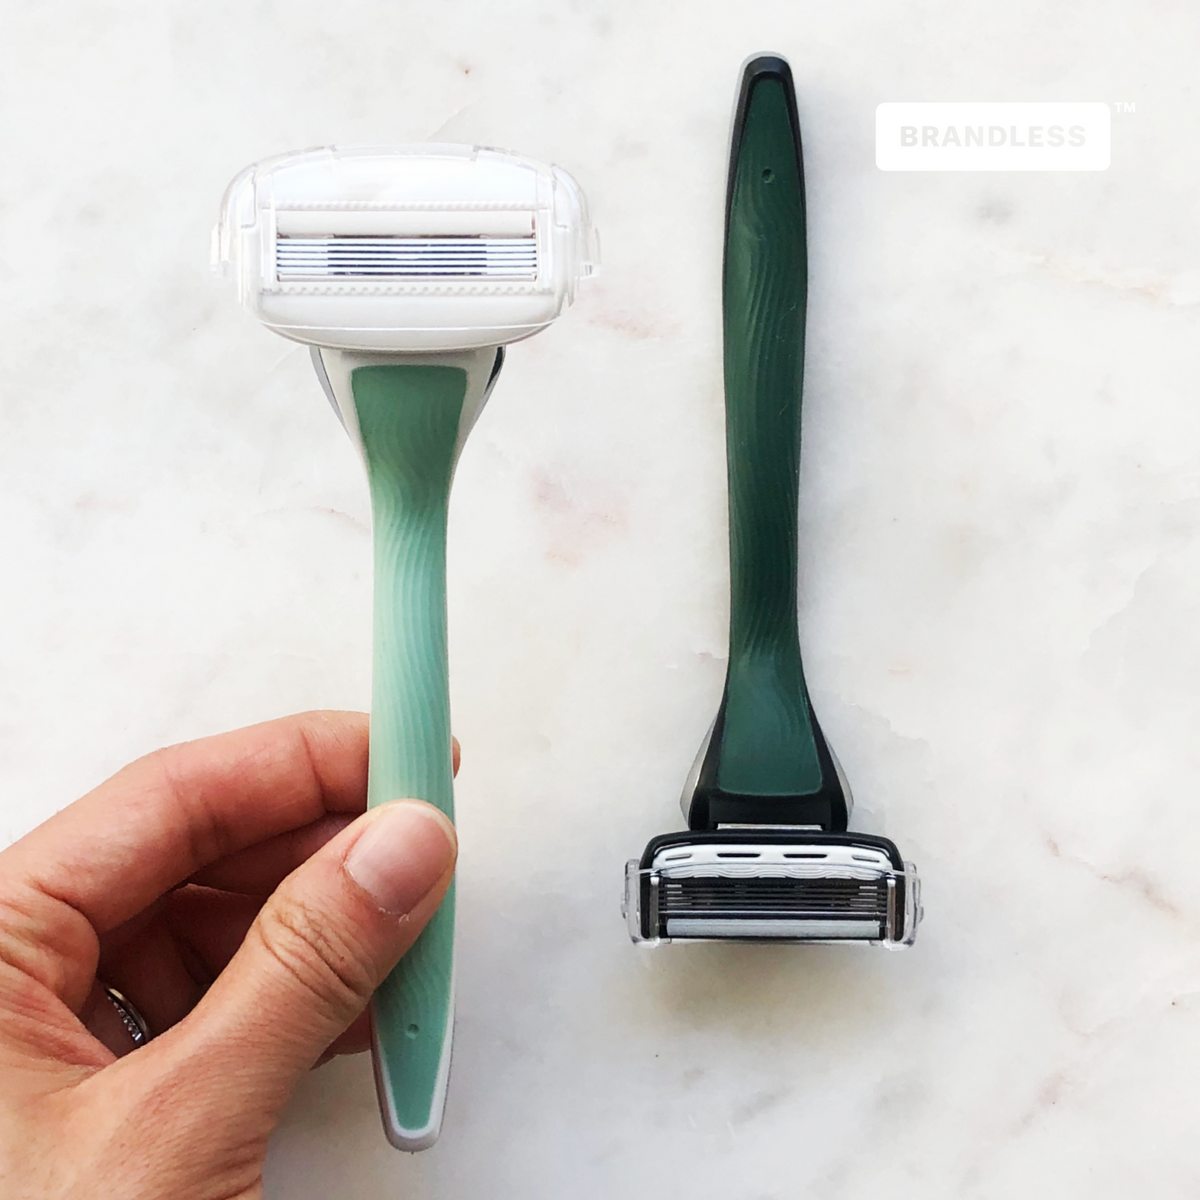 Lifestyle photo, a woman holds up the razor for body next to a razor for face sitting on a bathroom countertop.